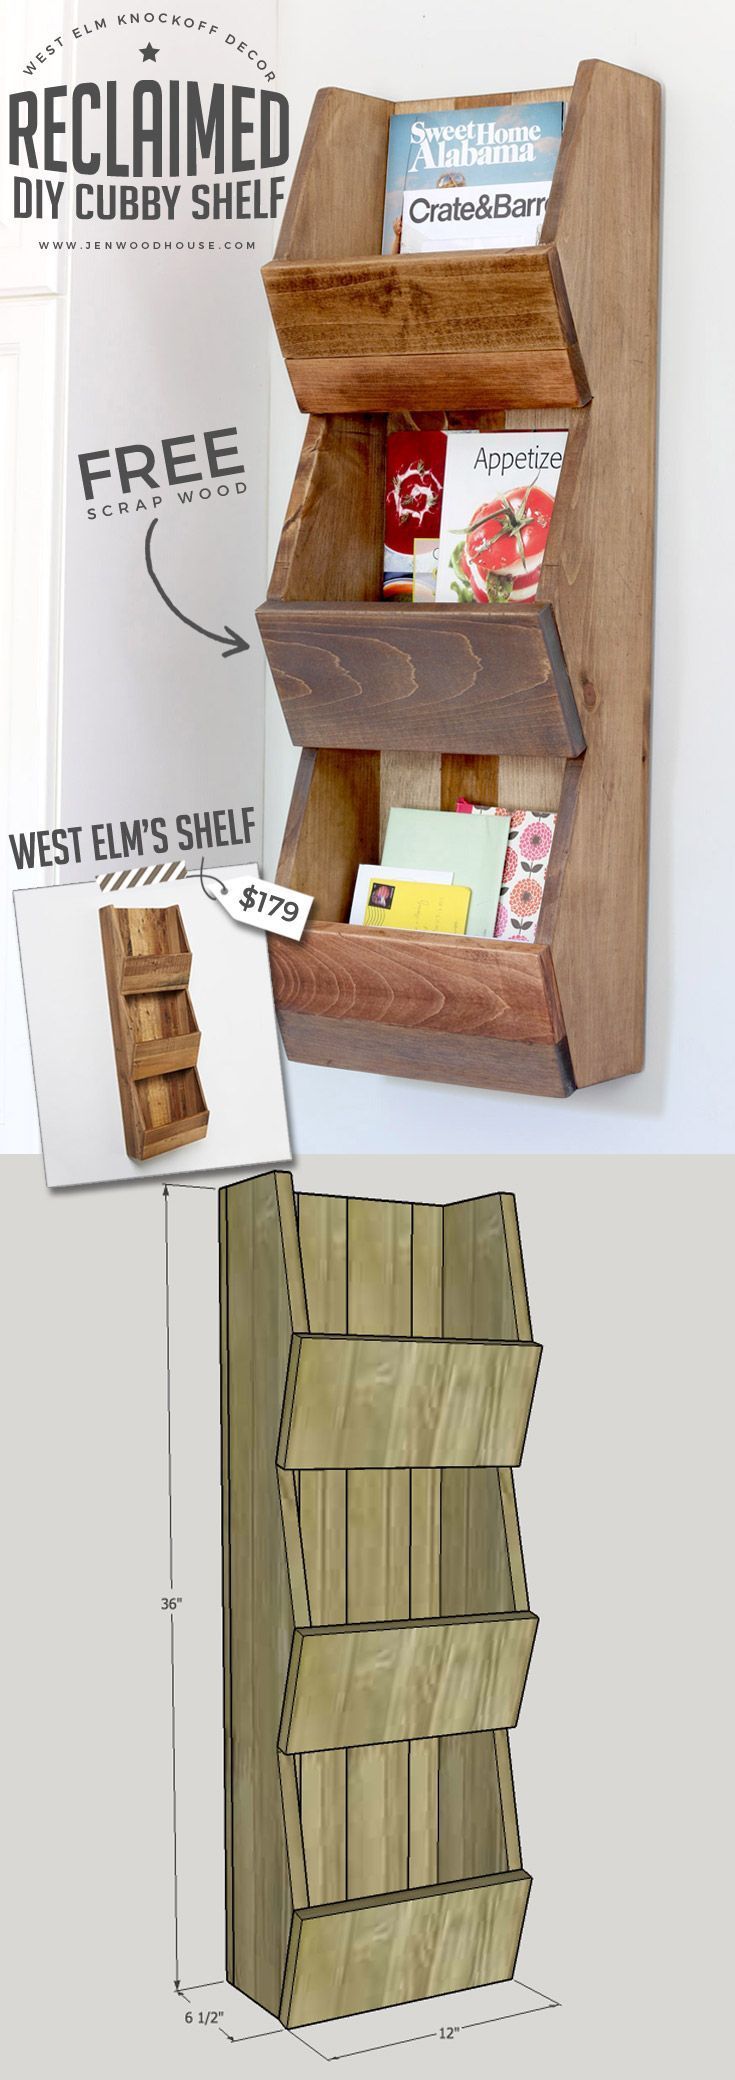 LOVE THIS! Tutorial on how to build a DIY West Elm knockoff cubby shelf. Build it out of scrap wood!